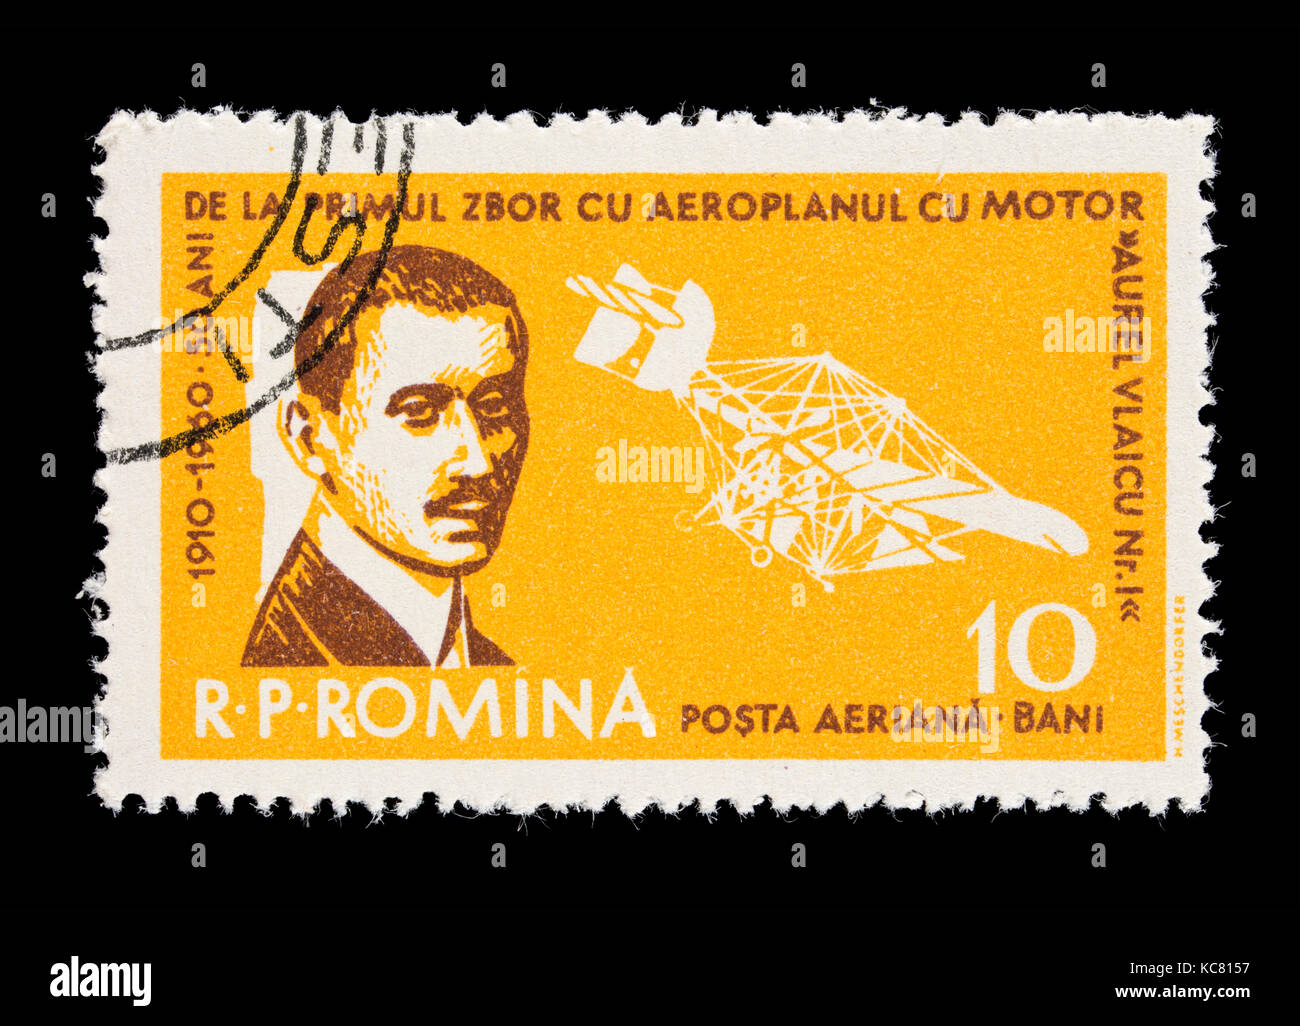 Postage stamp from Romania depicting Aurel Vlaicu and his plane of 1910, 50'th anniversary of the first Romanian flight. Stock Photo